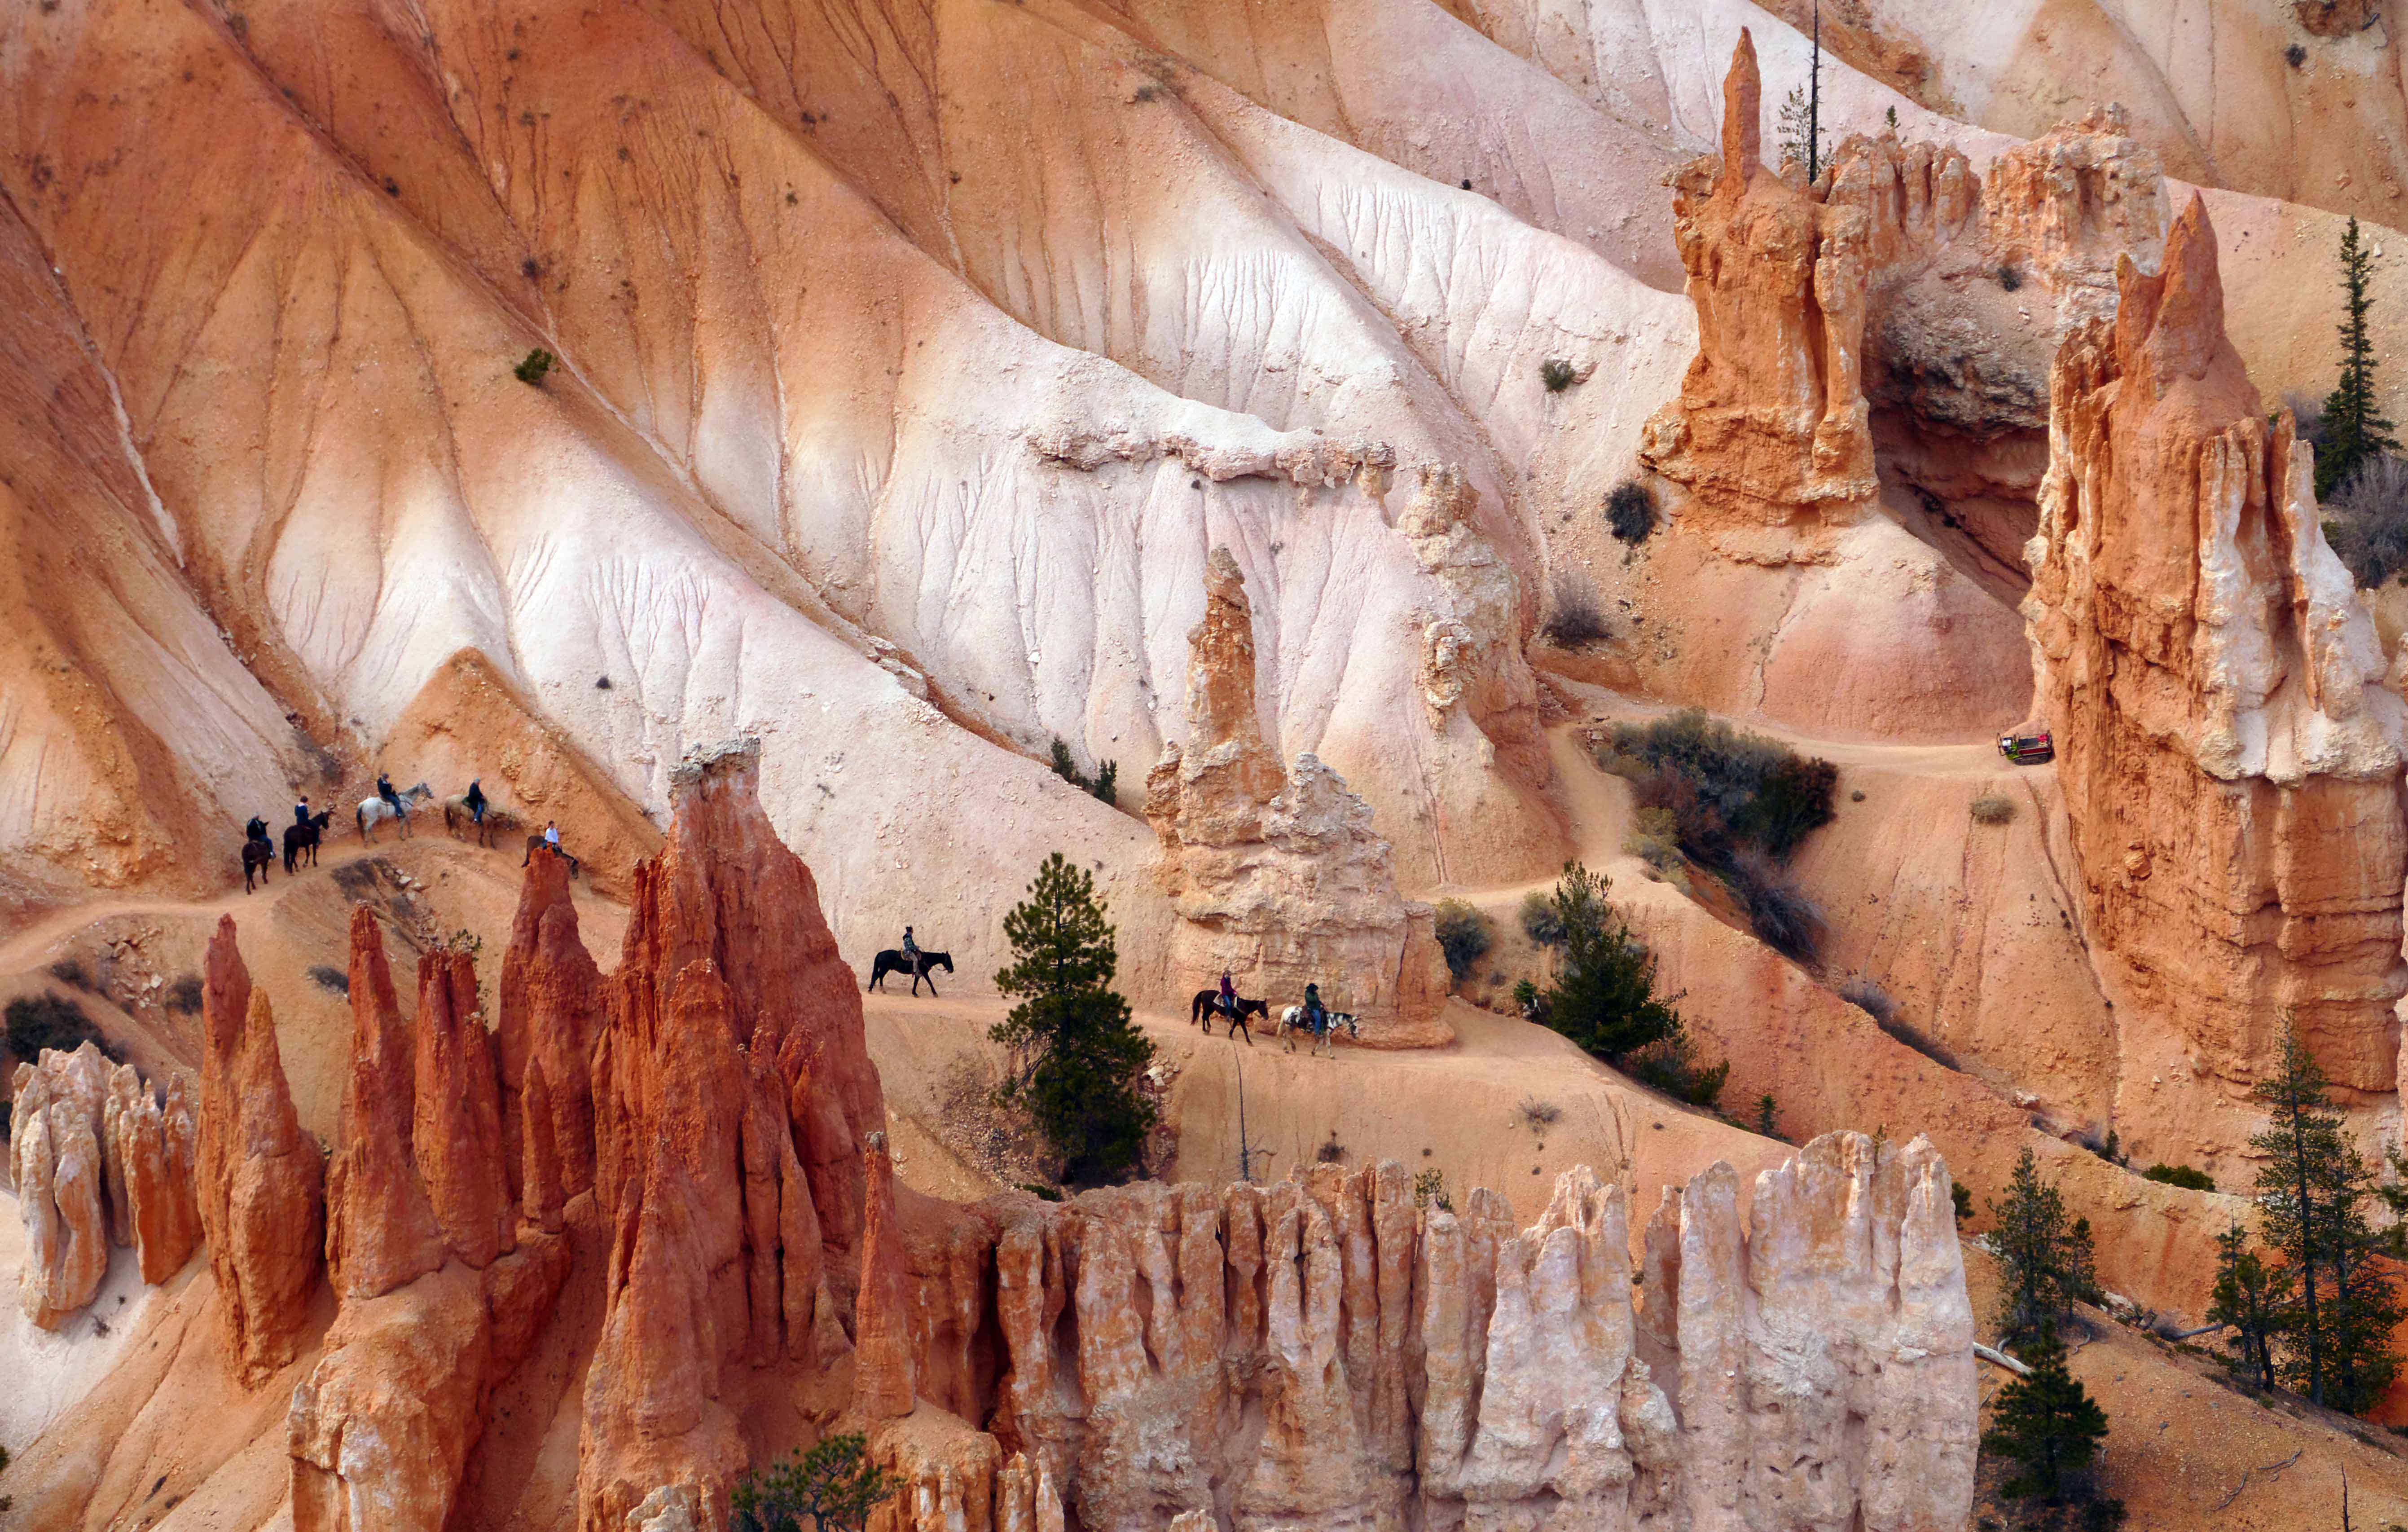 A line of horses travel along a winding trail in a red rock landscape